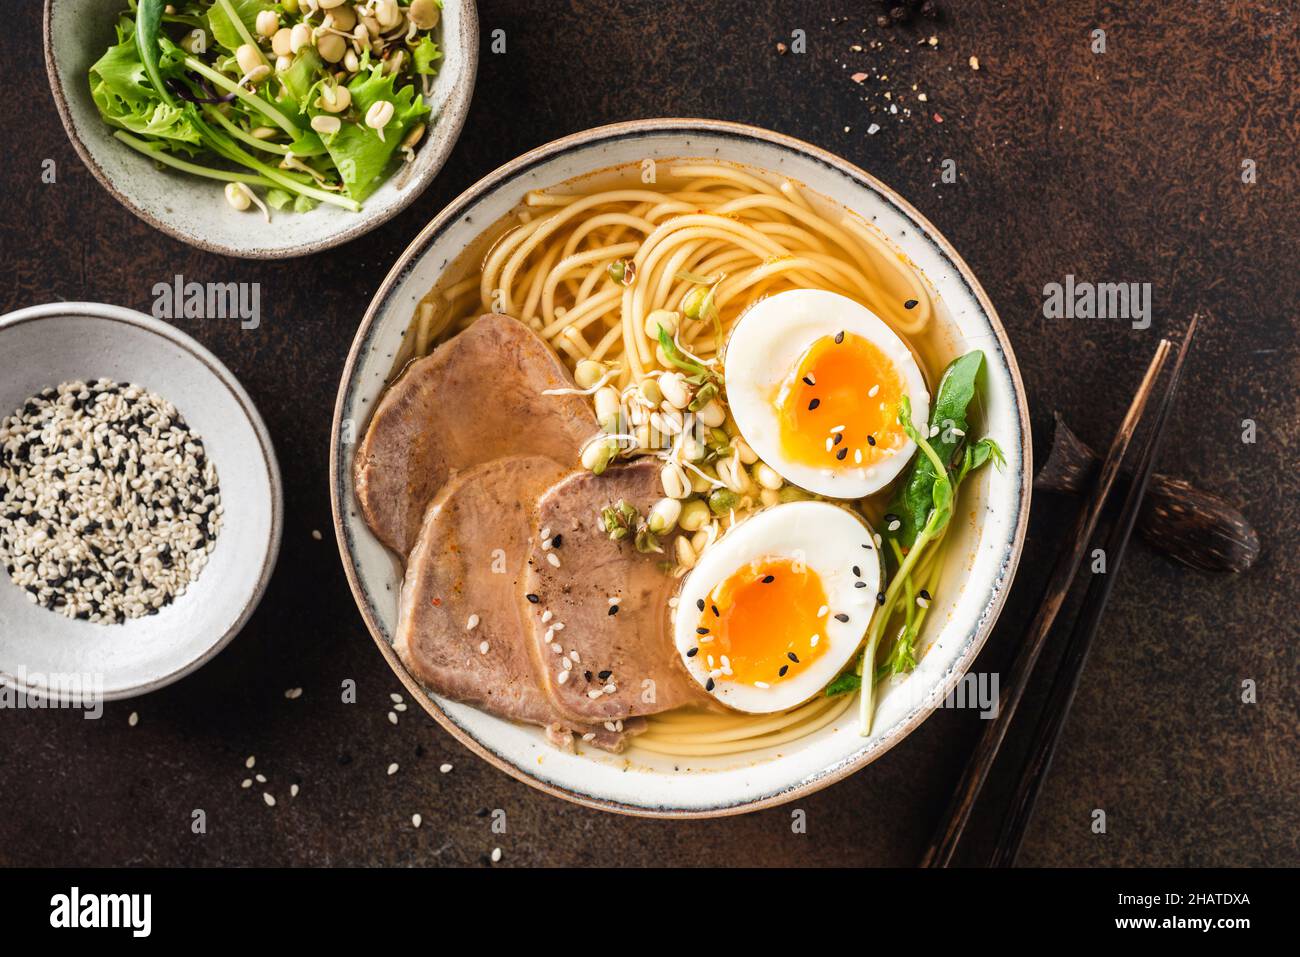 Ramen noodles bowl with pork and egg top view Stock Photo